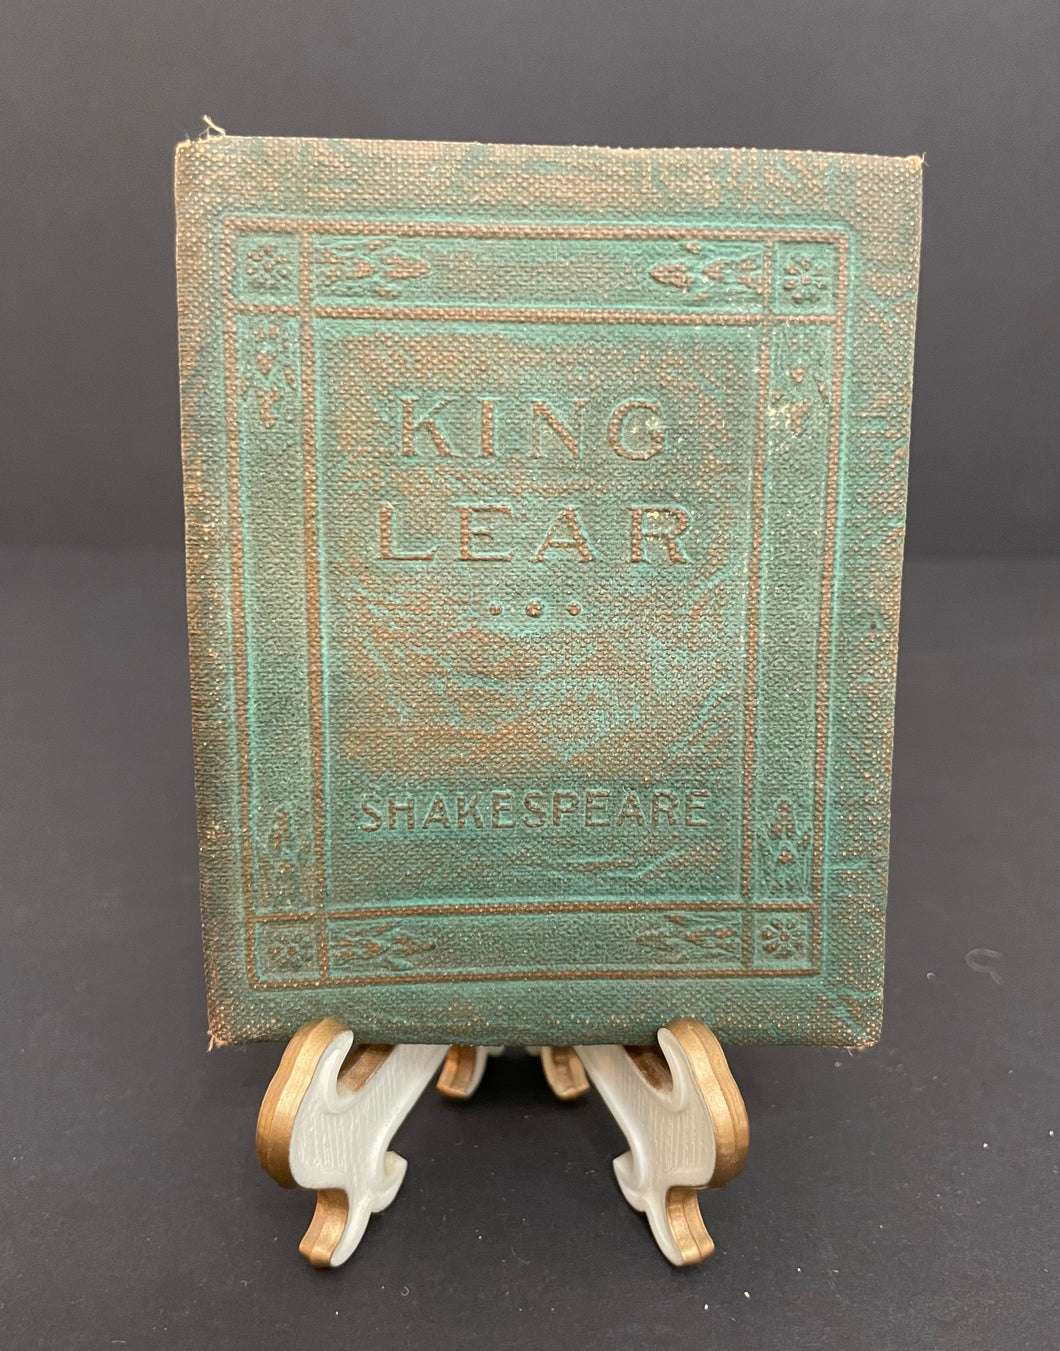 Antique Little Leather Library “King Lear” by Shakespeare Book